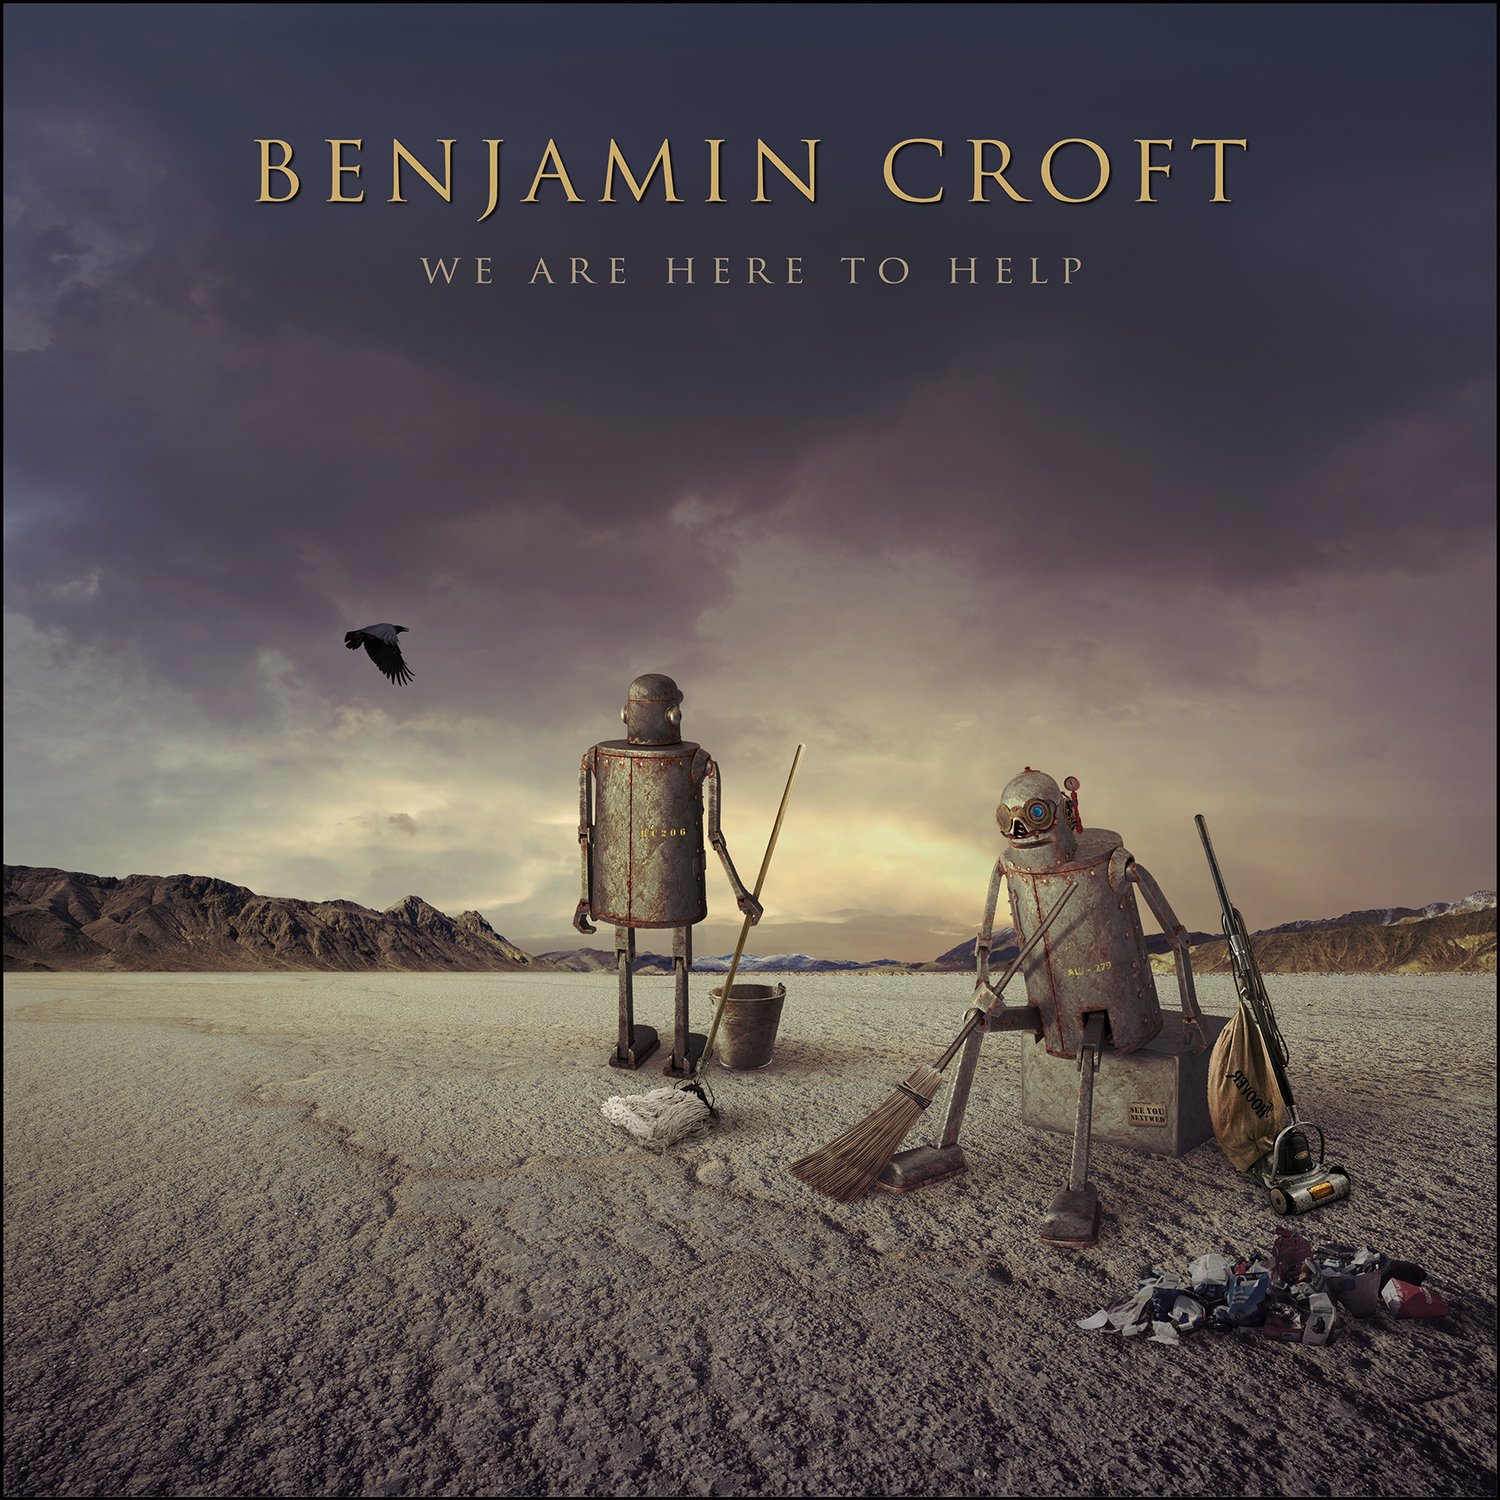 Benjamin+Croft+-+We+Are+Here+To+Help+-+Album+Cover+%C2%A9Hugh+Syme.JPG